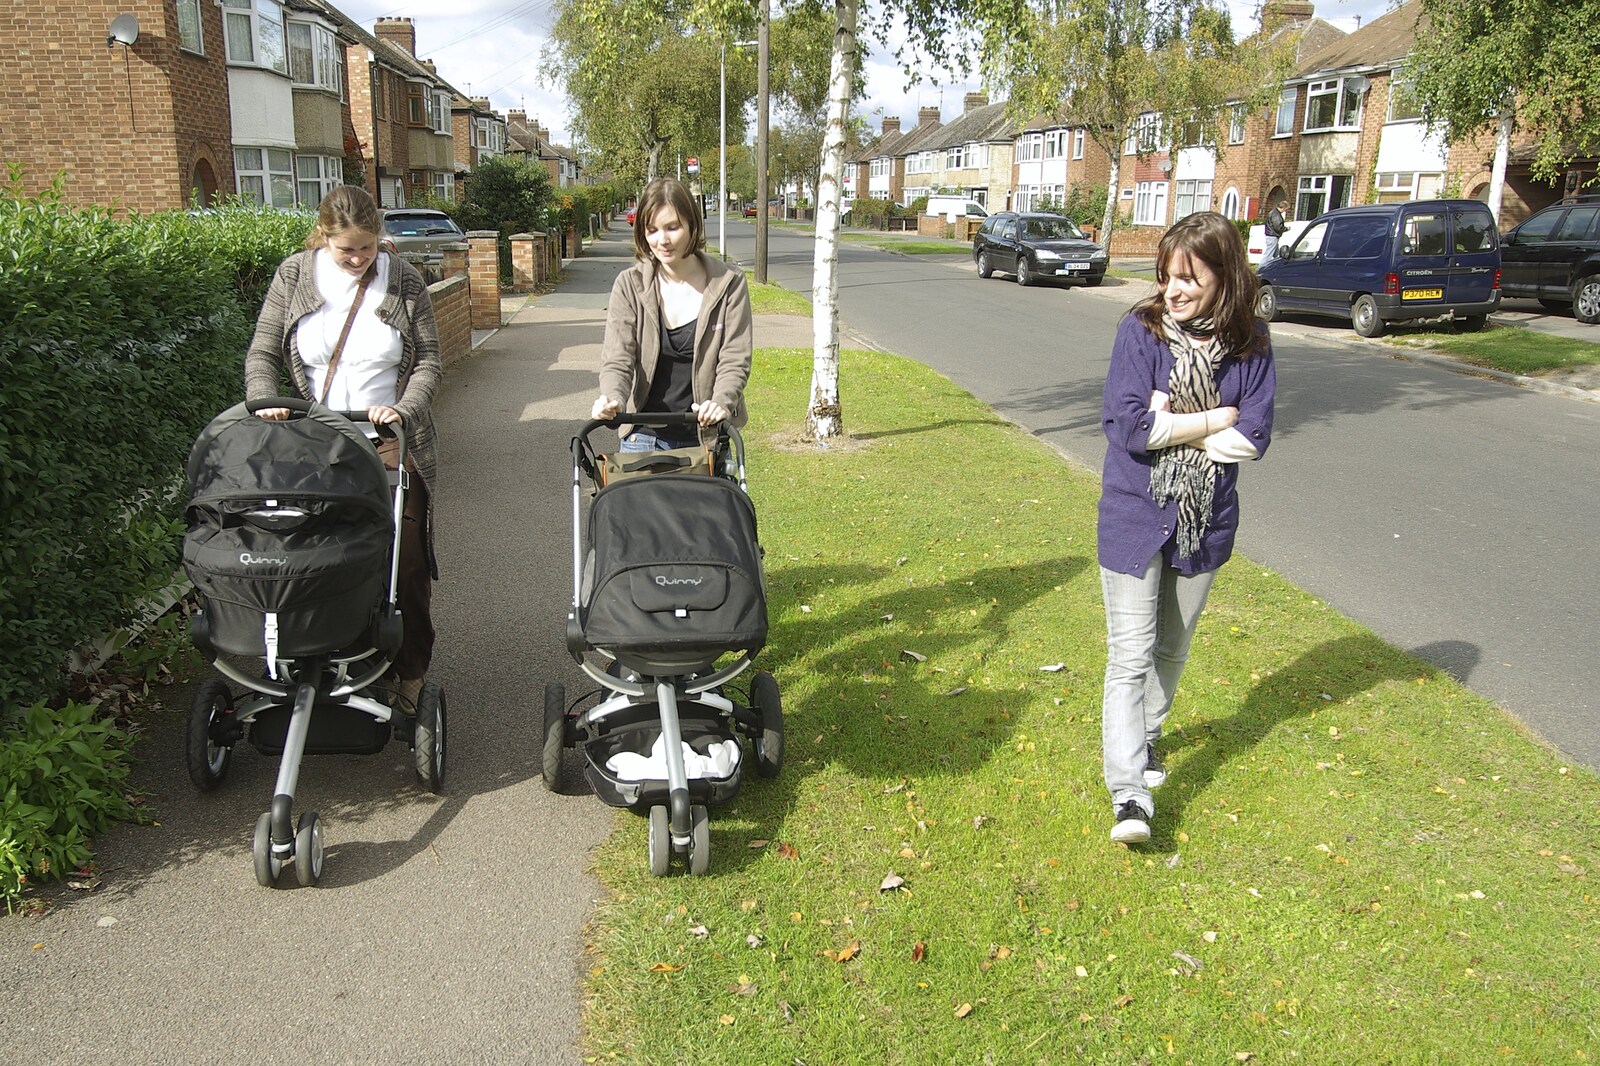 Fred's Further Adventures, Ward Road, Cambridge - 10th October 2008: New mums, and Caoimhe the Shoe on Birdwood Road